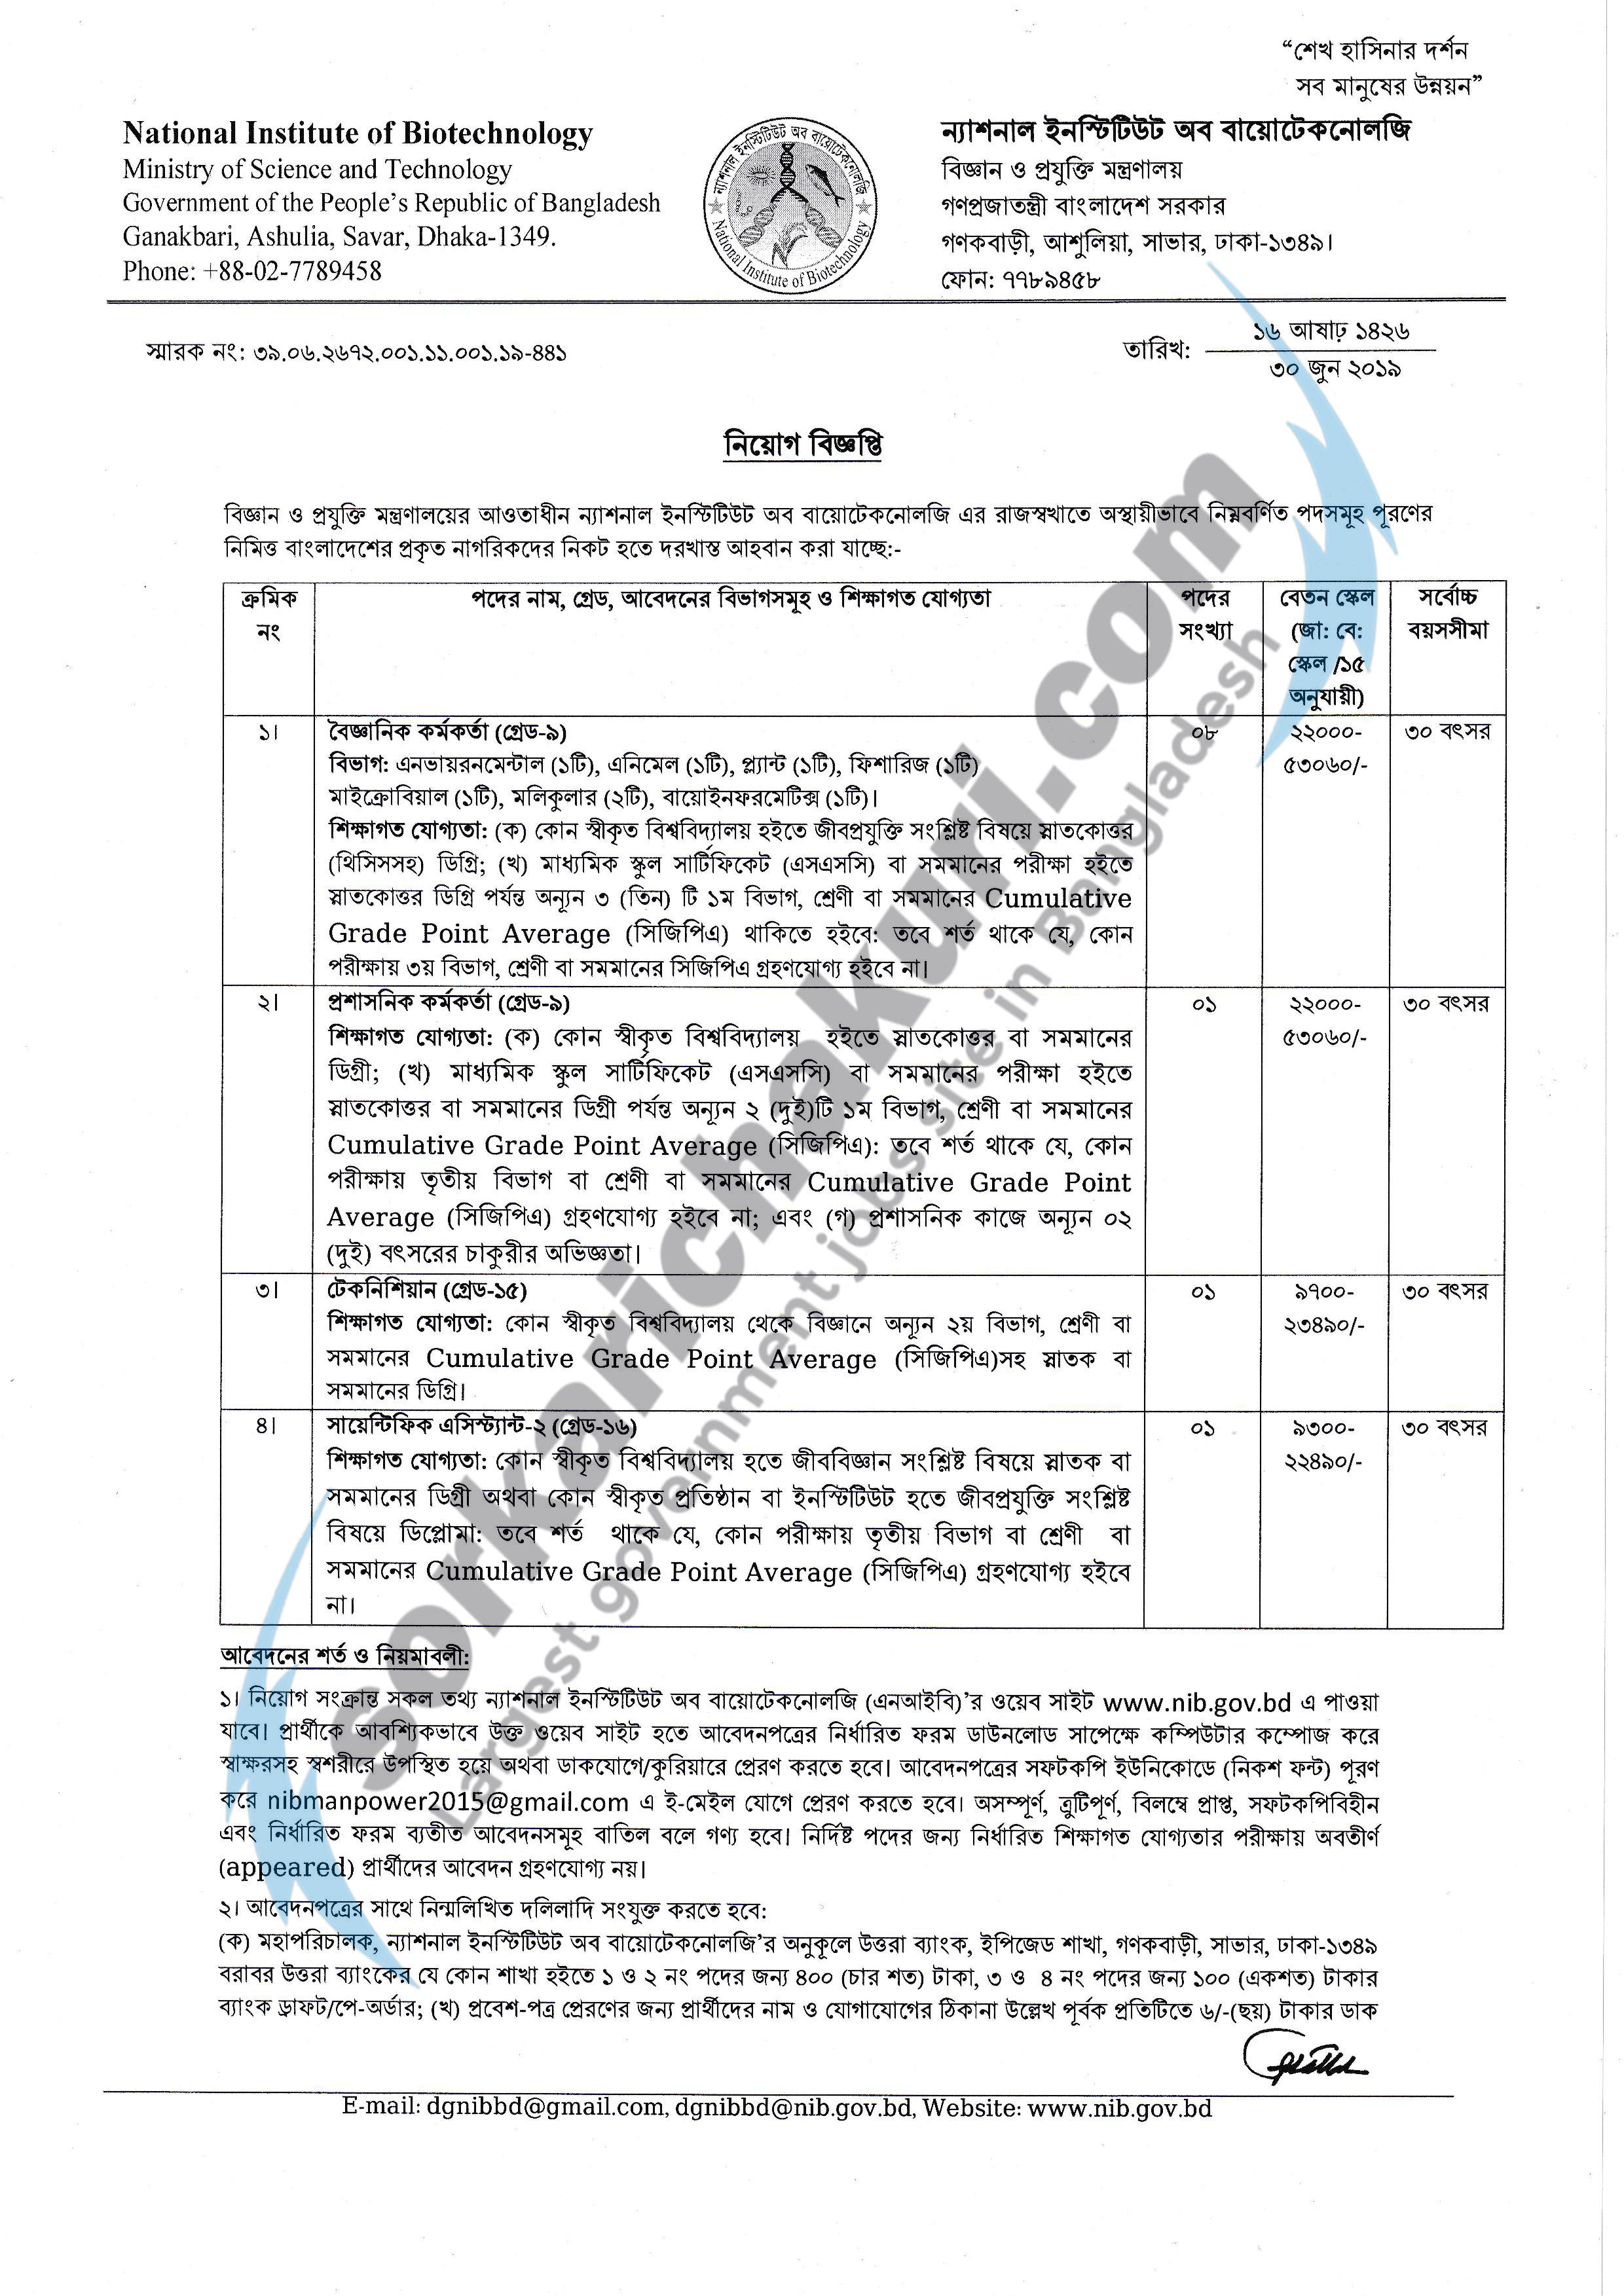 National Institute of Biotechnology Jobs Circular 2019